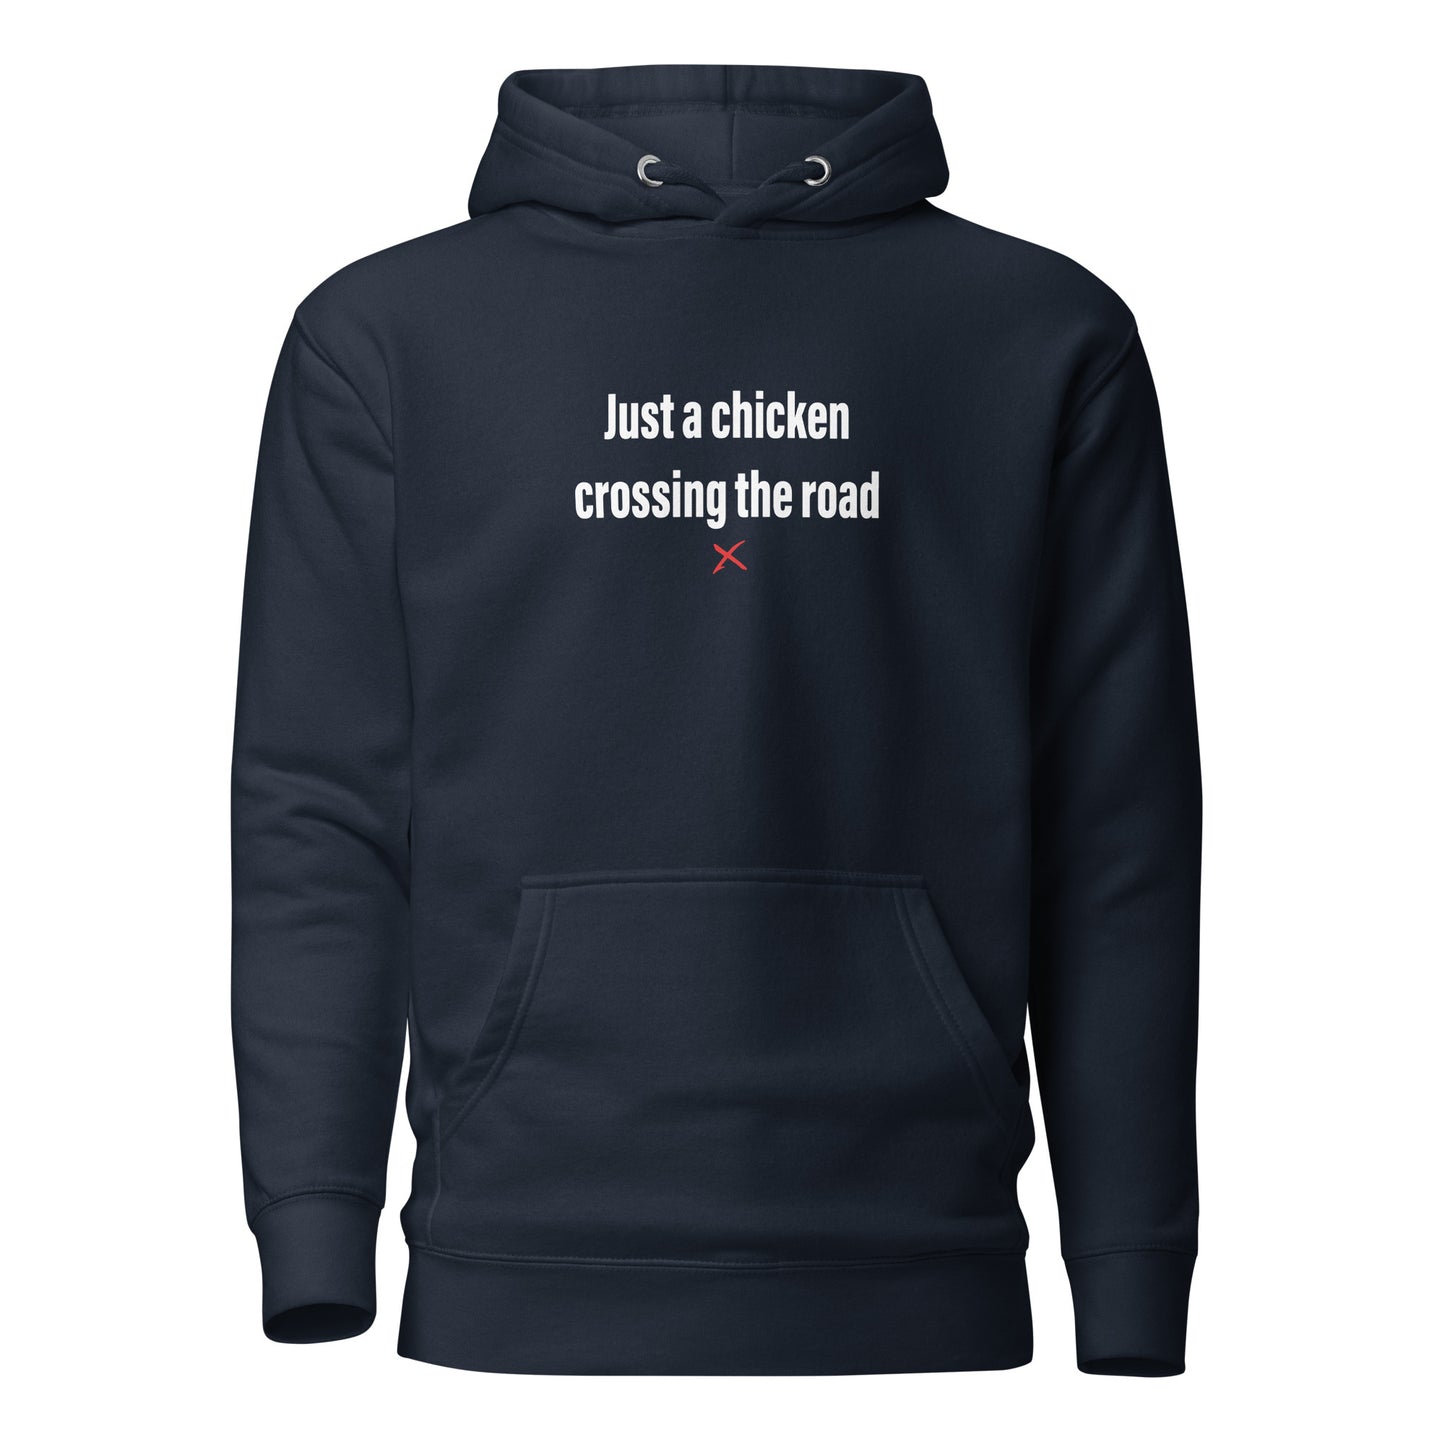 Just a chicken crossing the road - Hoodie